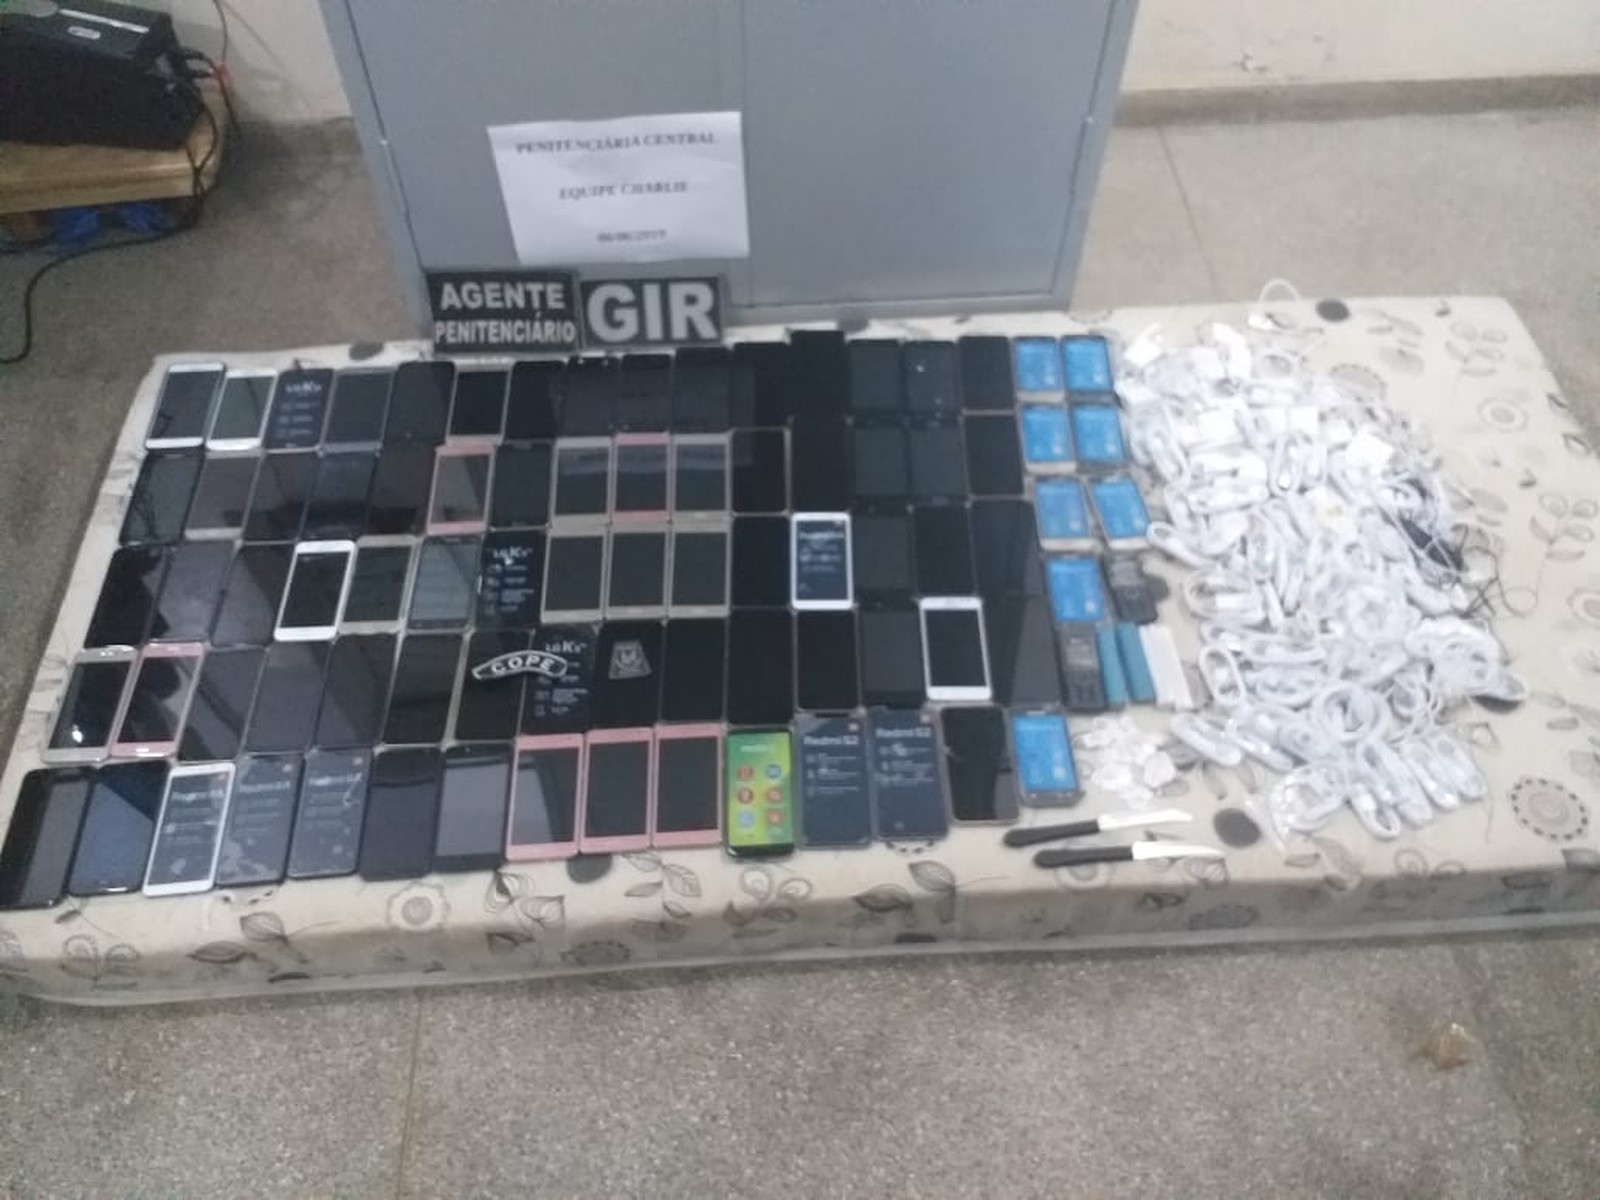 A freezer 'stuffed' with 84 cell phones was detected by agents in the Central Penitentiary of the State, in Cuiabá, capital of Mato Grosso.